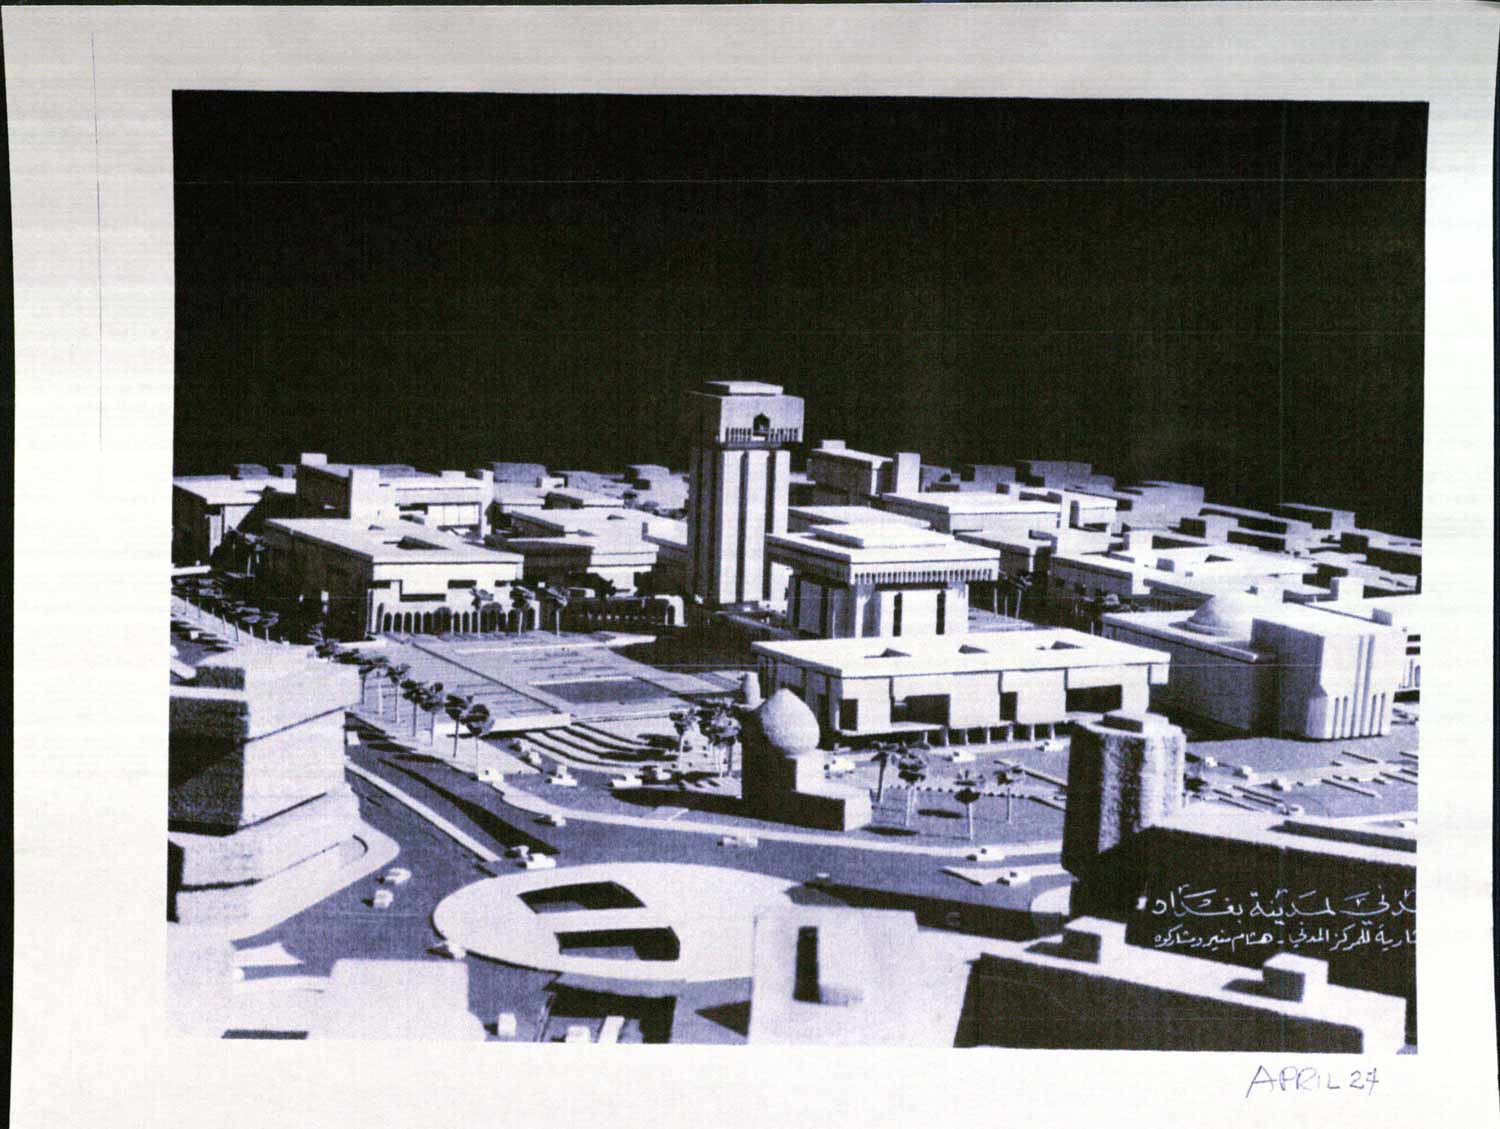 Photograph of an architectural model of the Baghdad Civic Center Complex.